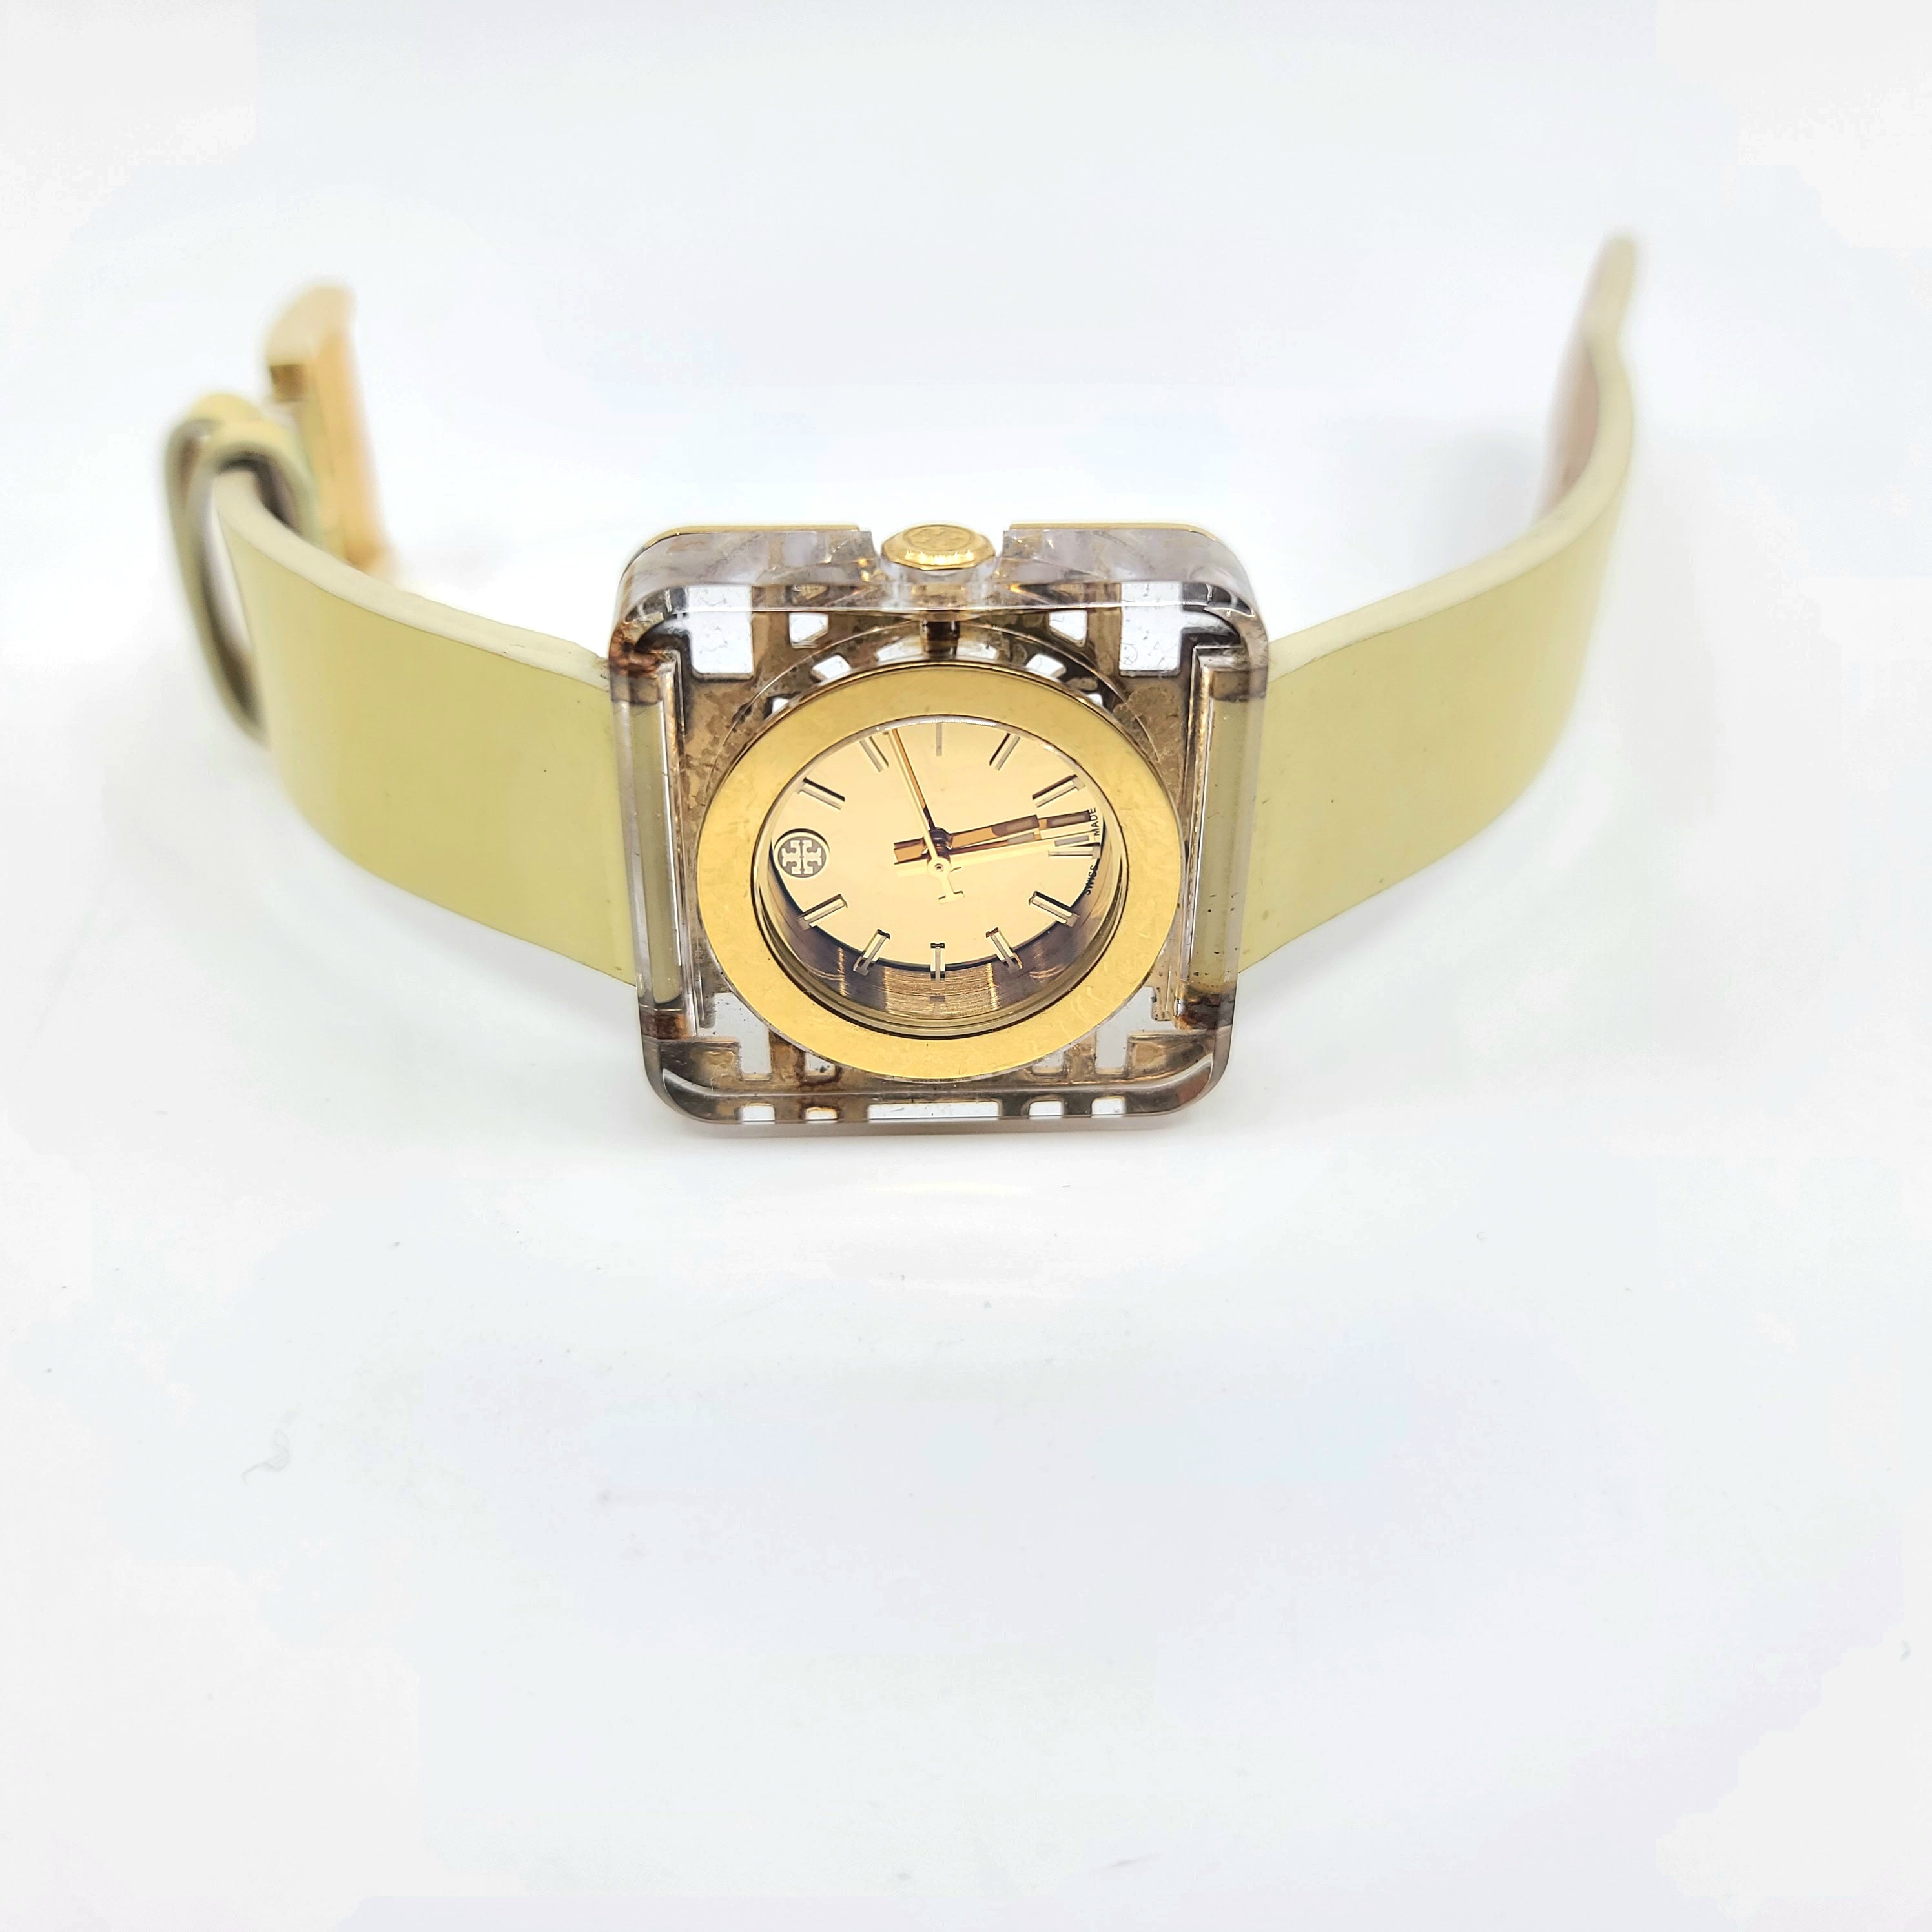 Tory Burch Gold tone leather watch